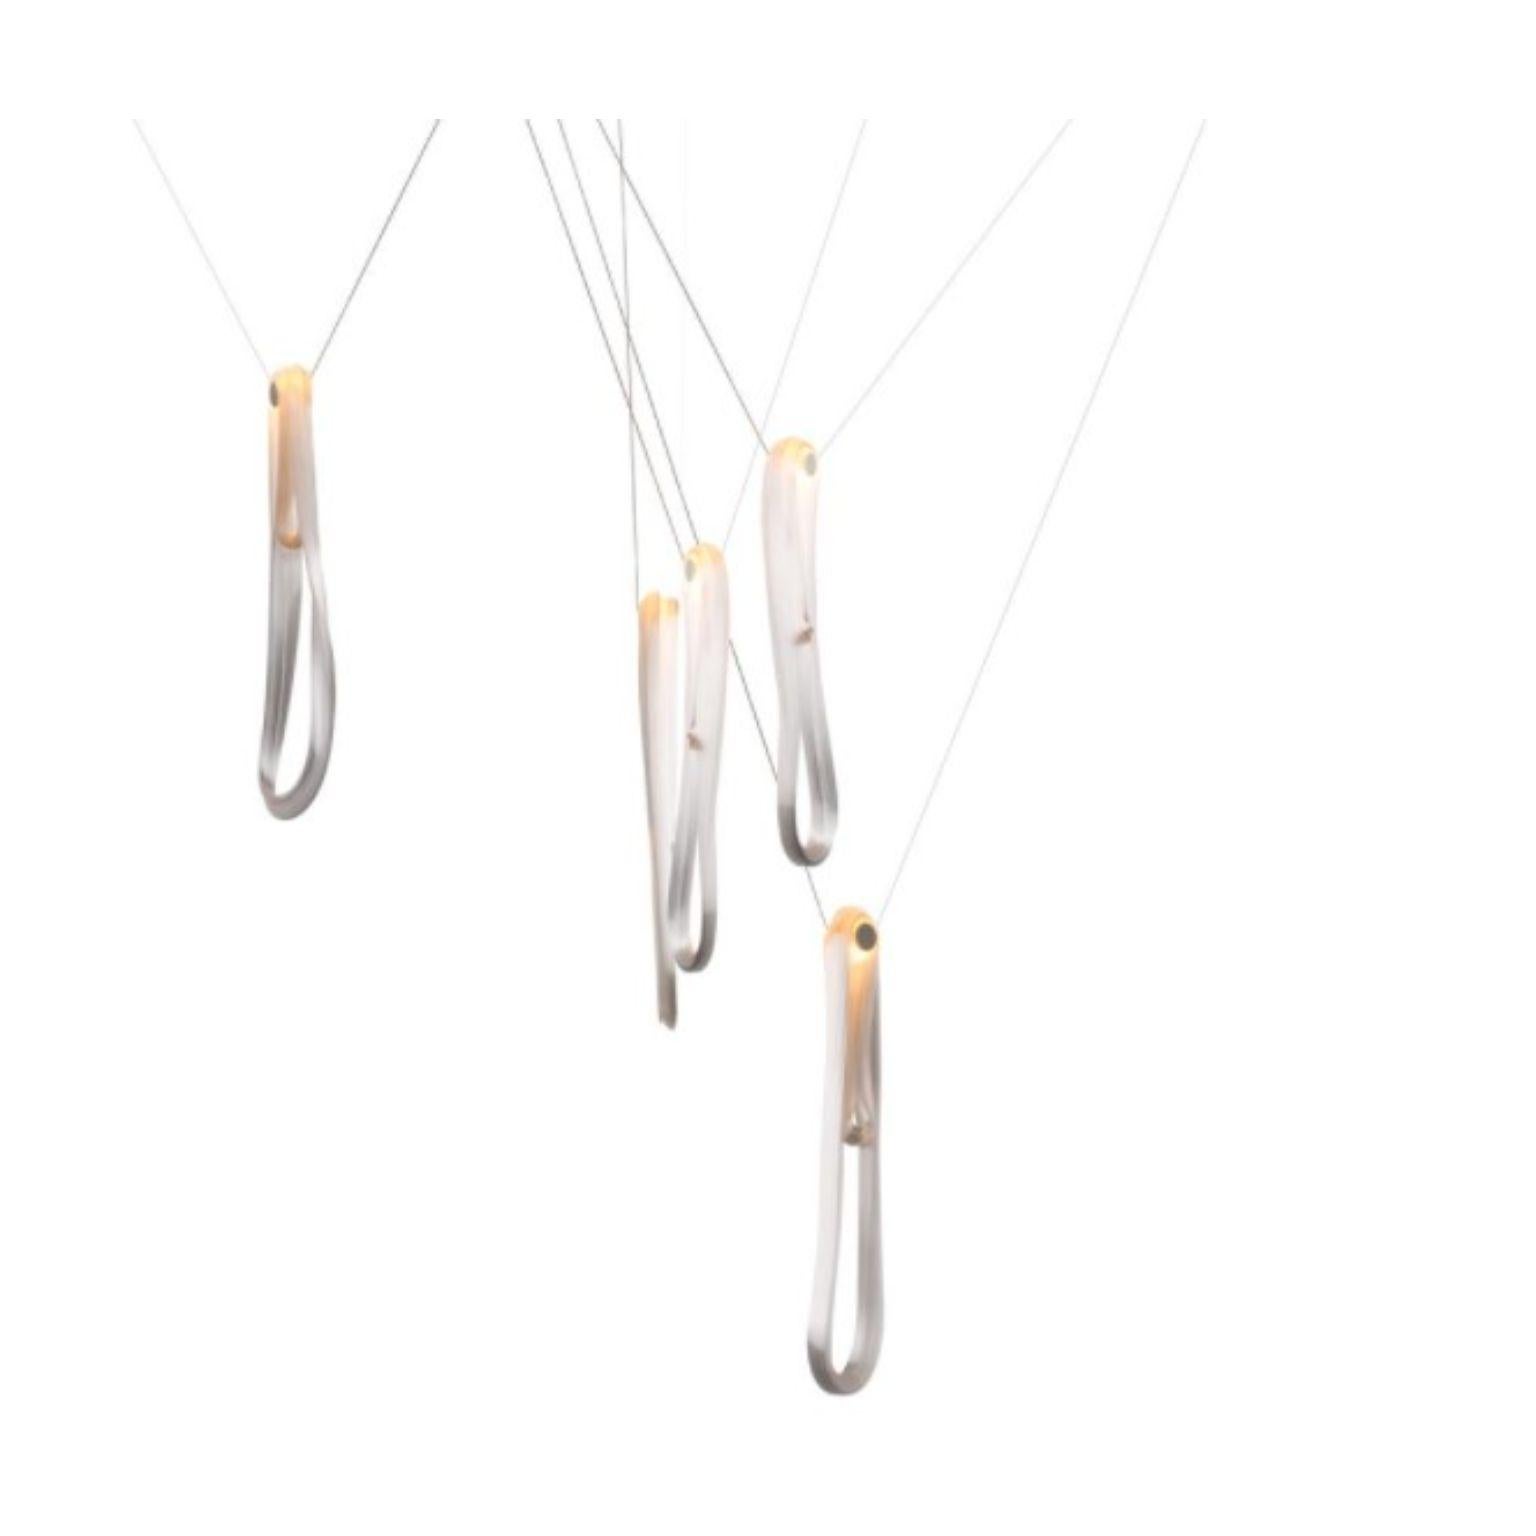 87.5 pendant by Bocci
Dimensions: D 15.2 x H 300 cm
Materials: brushed nickel round canopy
Weight: 6.8 kg
Also available in different dimensions.
All our lamps can be wired according to each country. If sold to the USA it will be wired for the